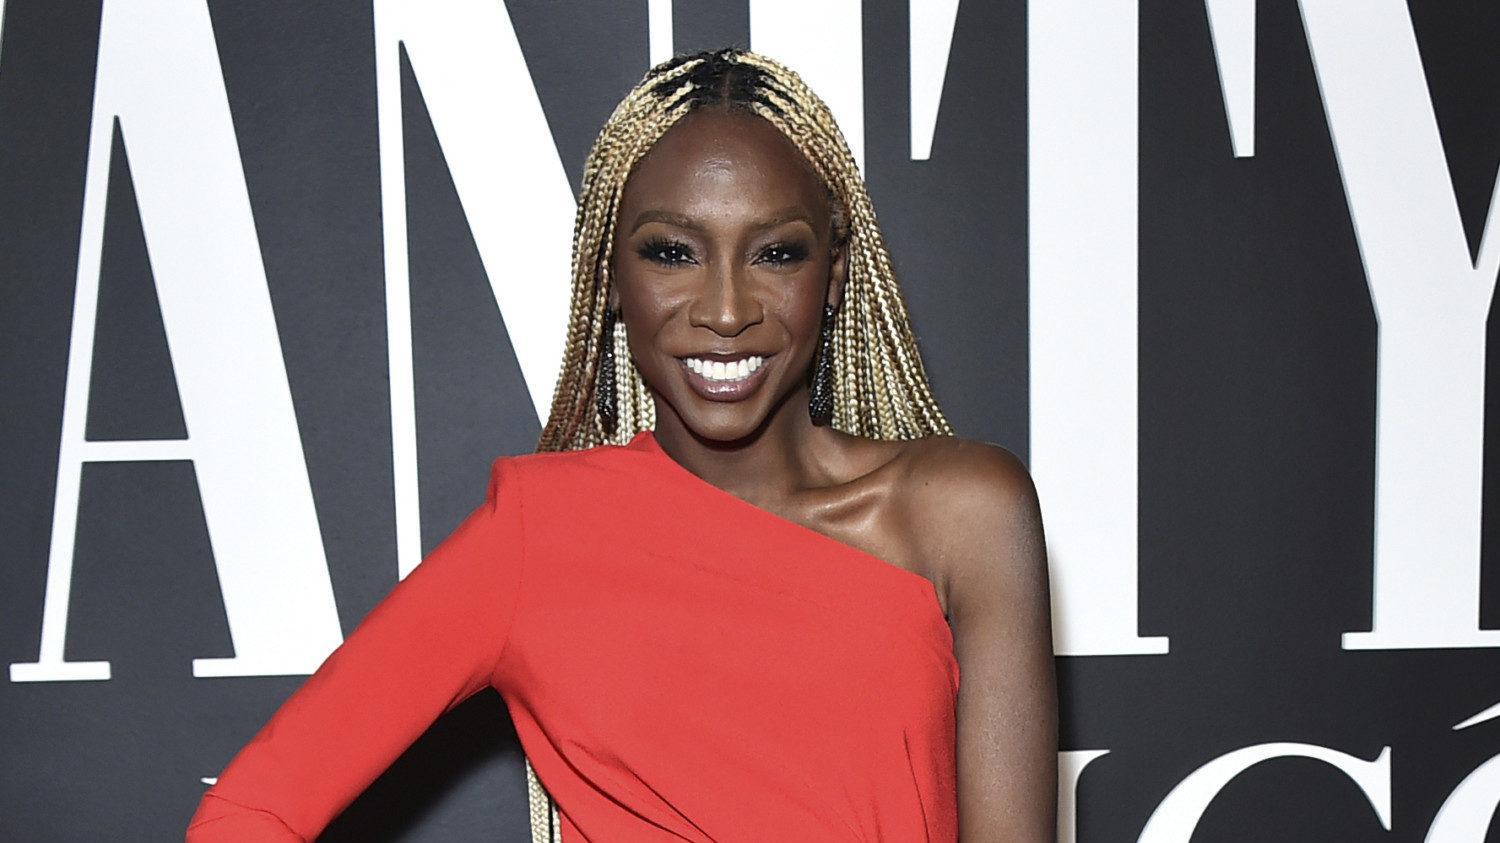 Actress Angelica Ross to play Roxie in "Chicago"